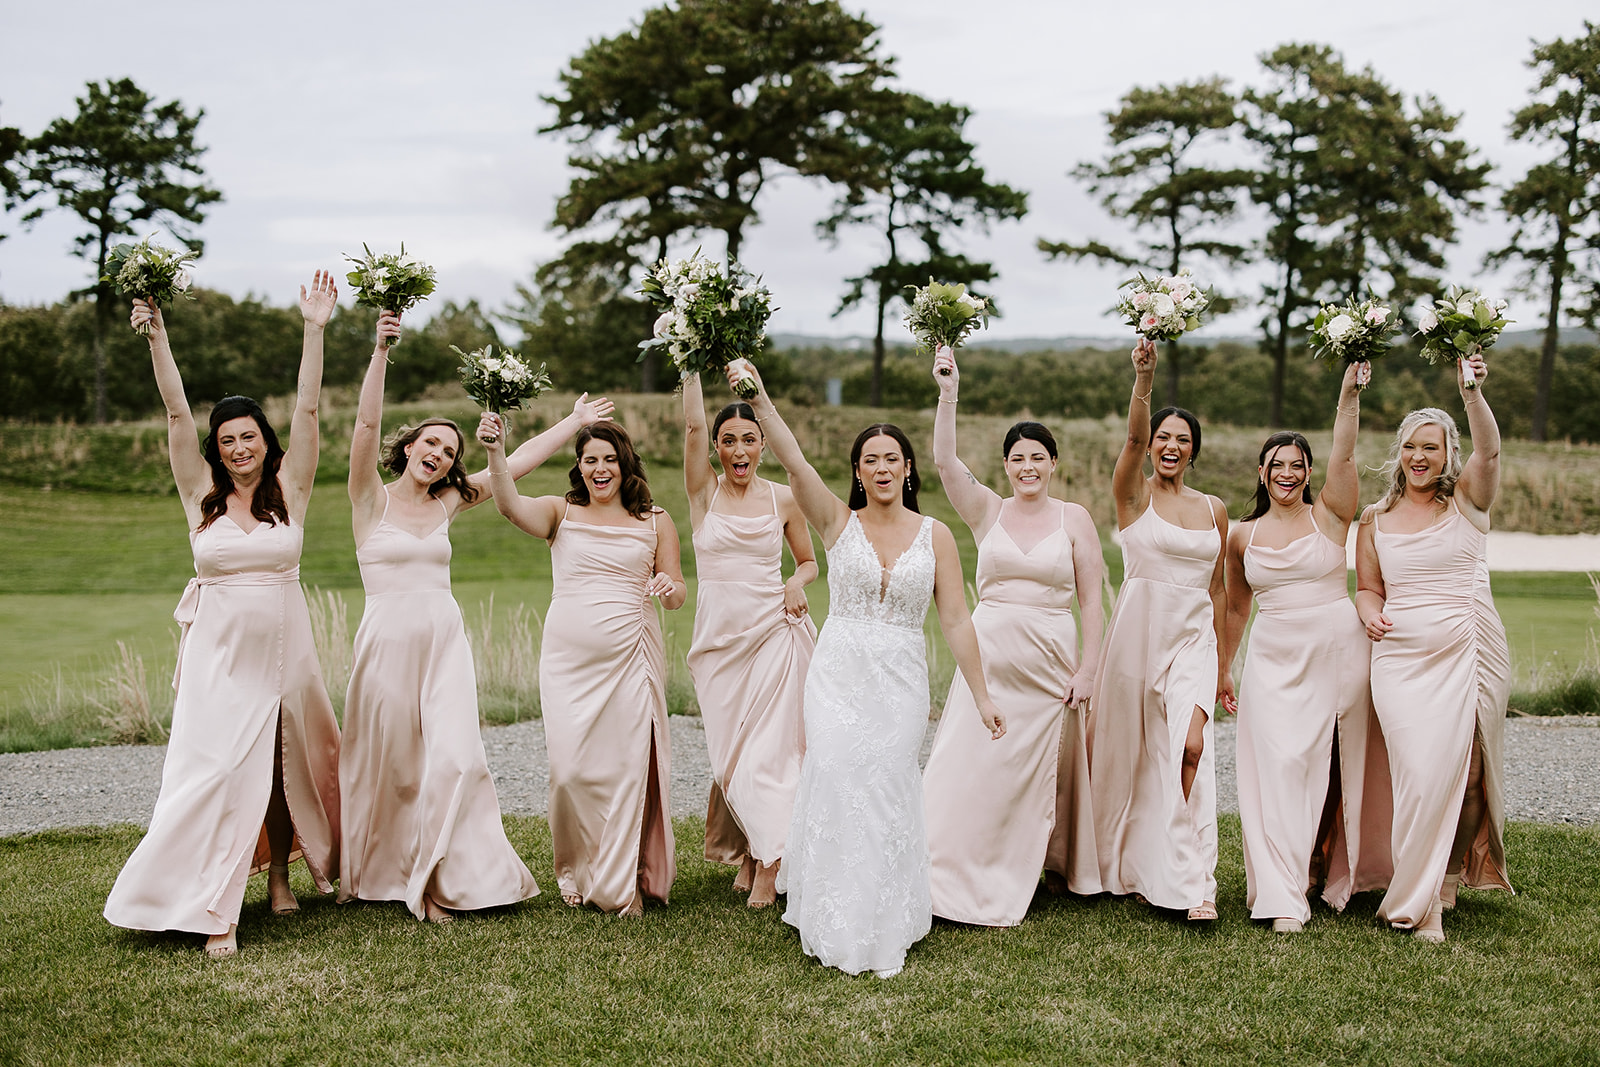 Bridesmaids pose together after the dreamy New England wedding